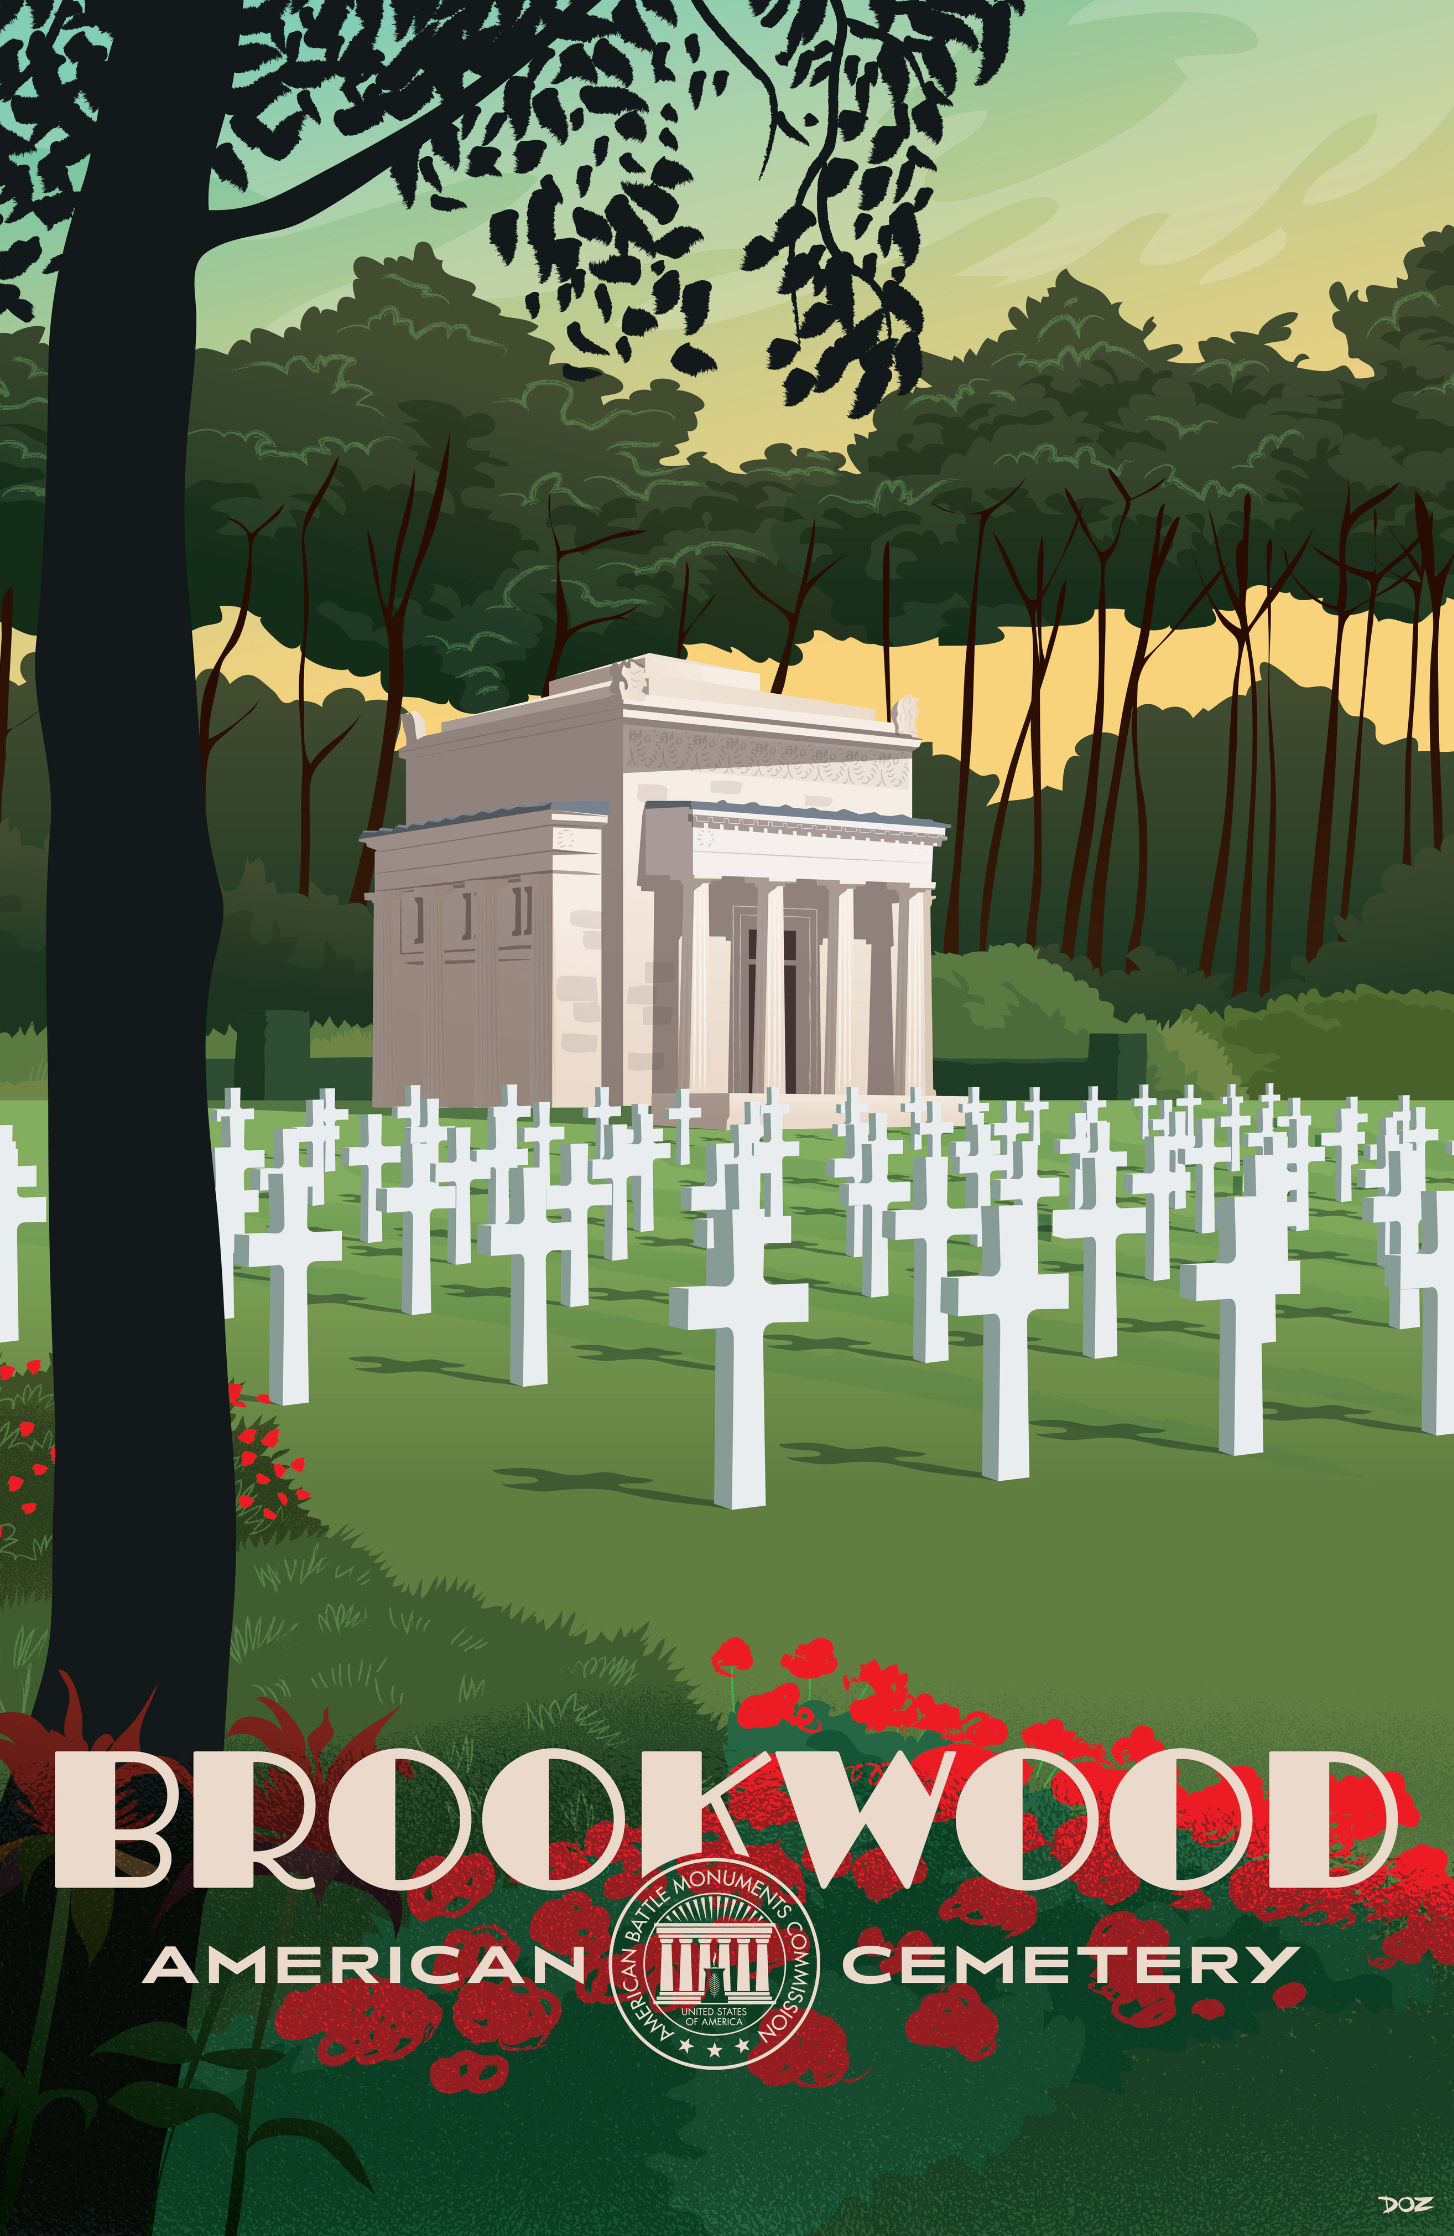 Vintage poster of Brookwood American Cemetery created to mark ABMC Centennial